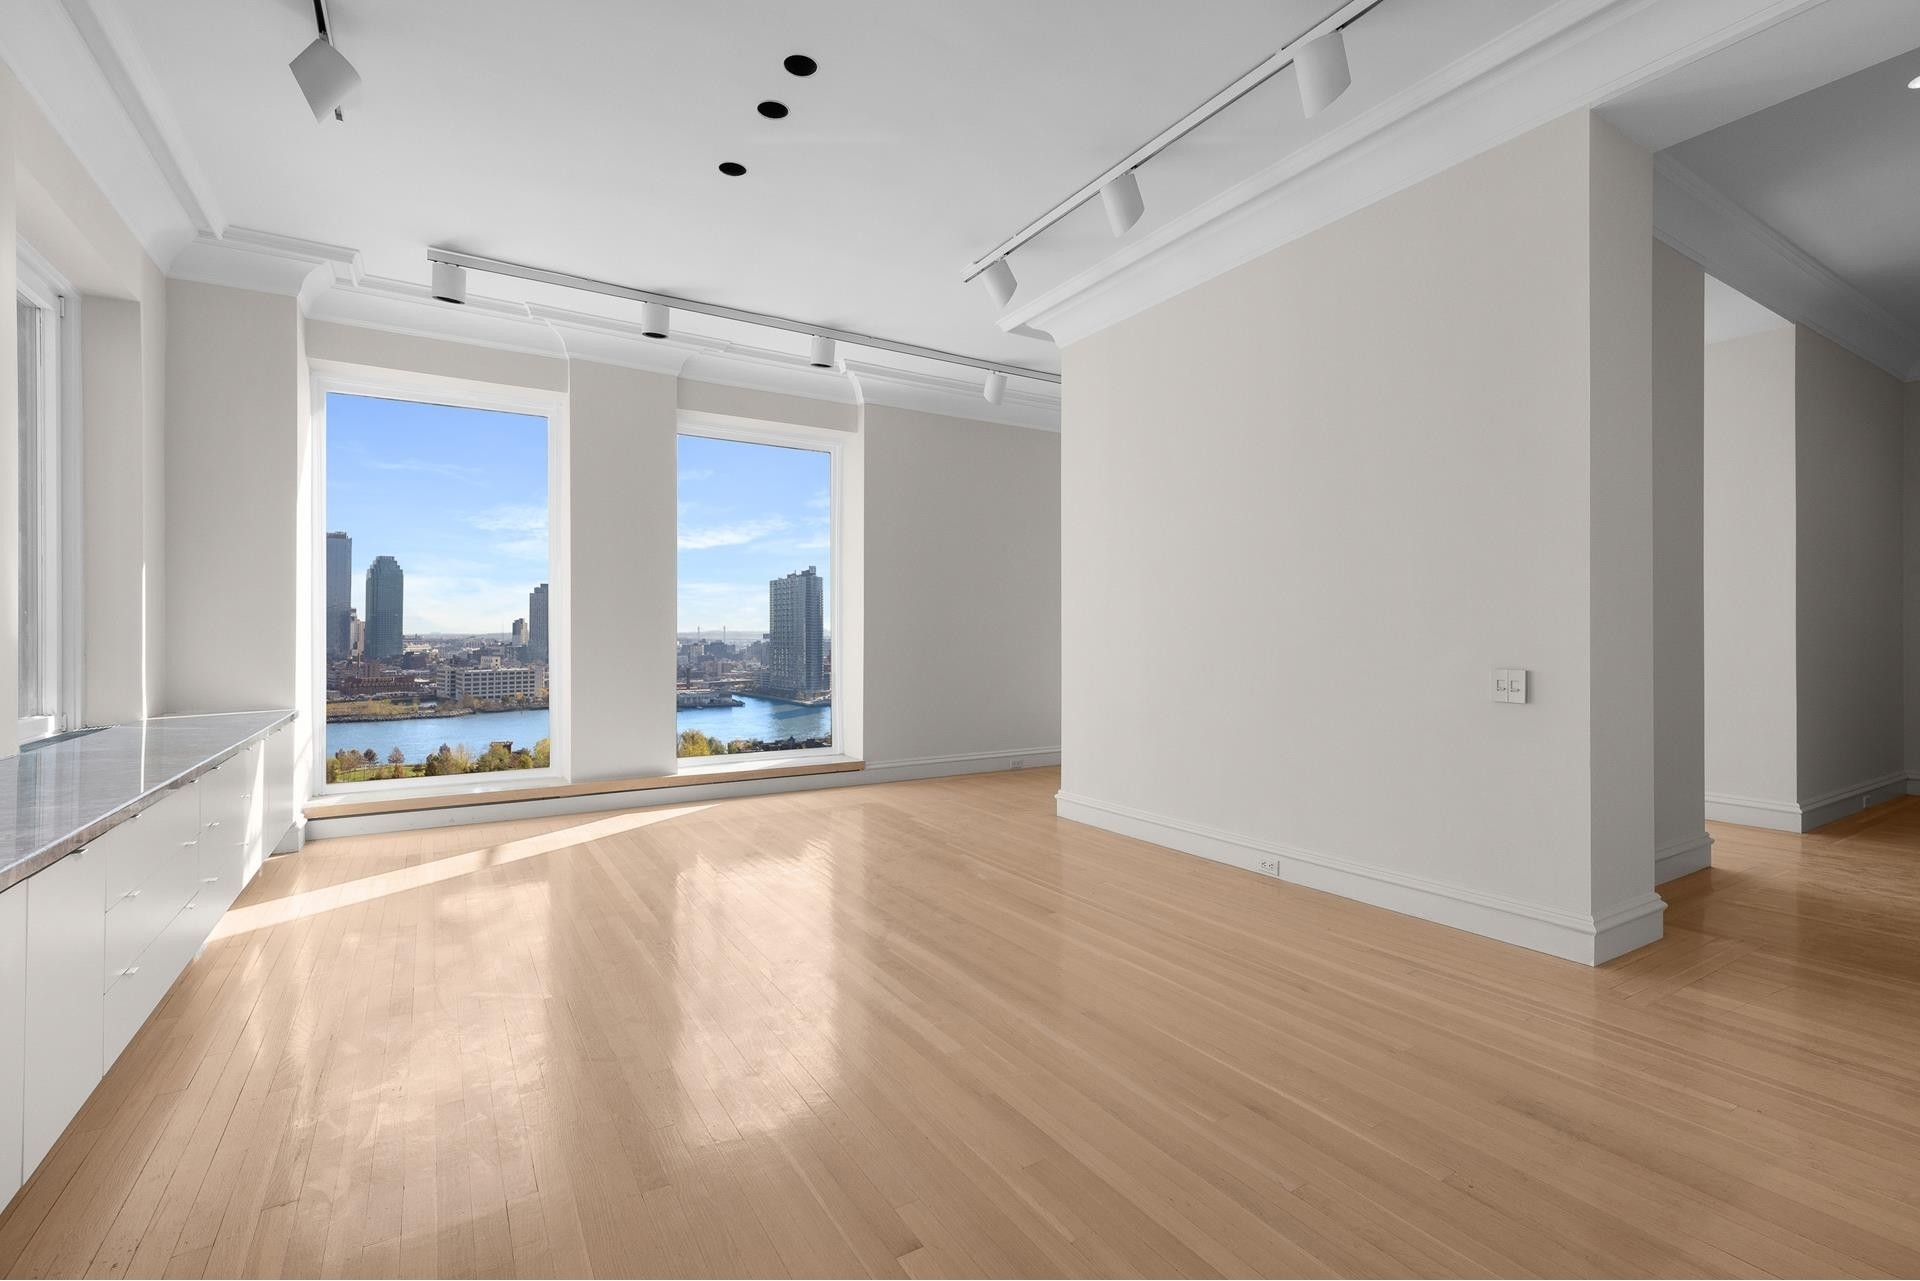 11. Co-op Properties for Sale at RIVER HOUSE, 435 E 52ND ST, 15A Beekman, New York, NY 10022